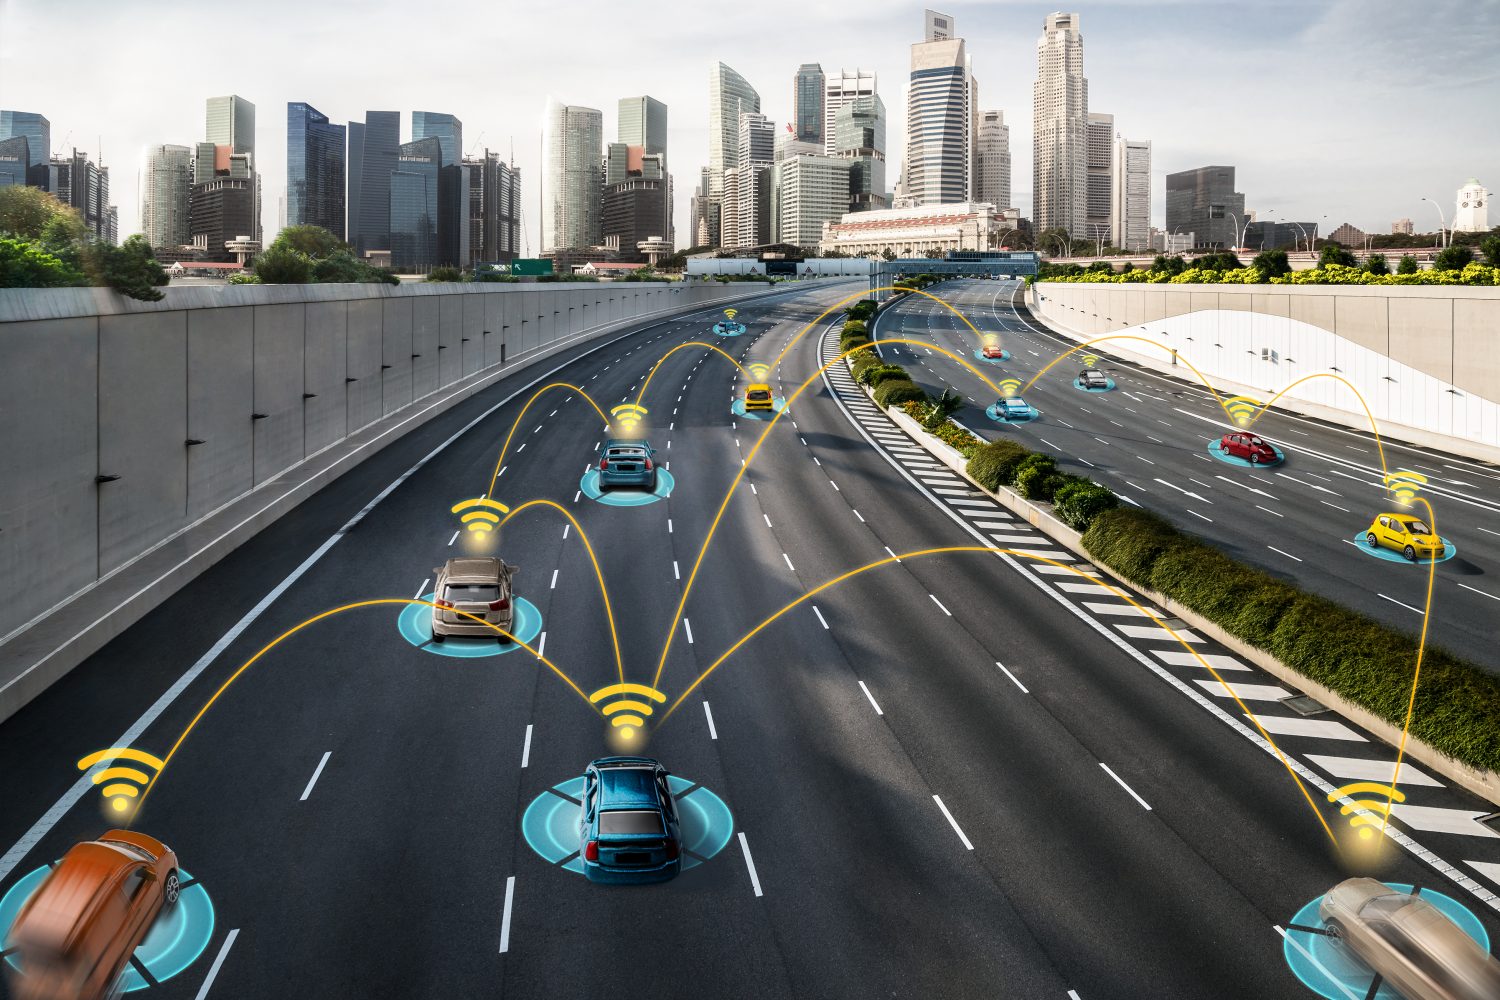 With the data discovered today, if a consumer has a connected car, take note that the more things change, the more they stay the same. 